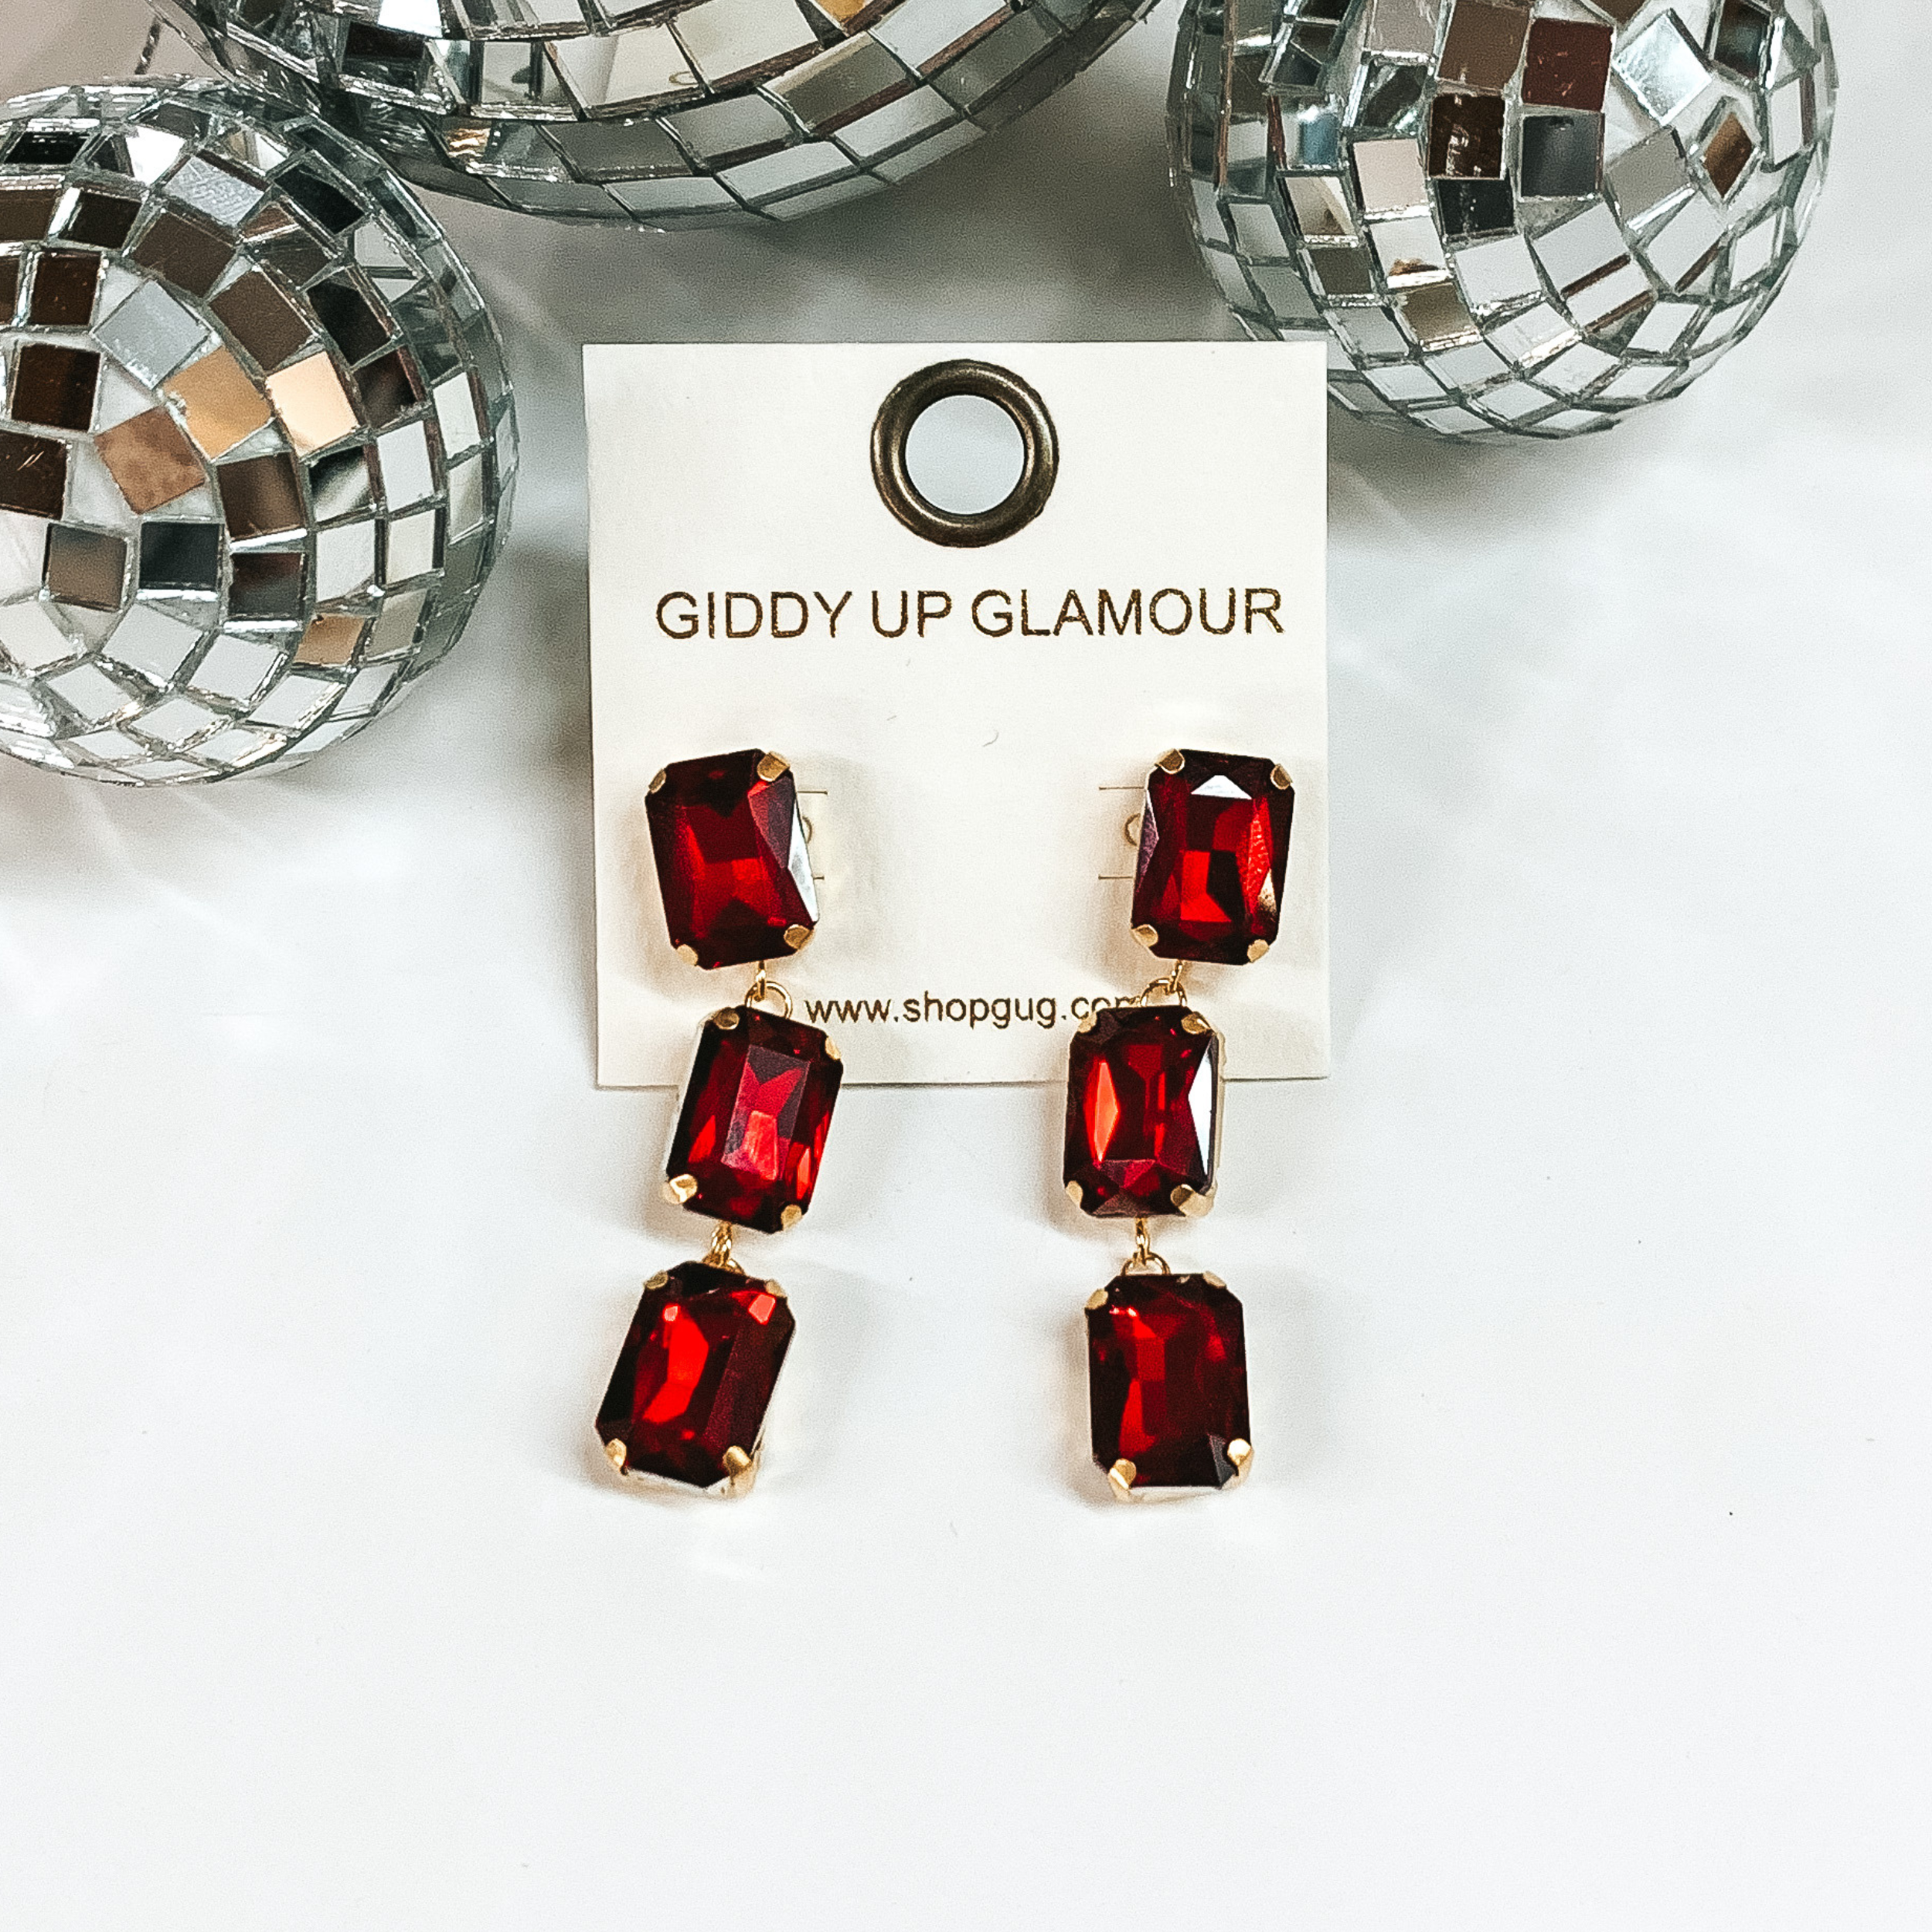 These stunning earrings add the perfect amount of sparkle. Earrings feature three red rectangle crystal stones in a gold tone setting. Earrings are placed on a white board with three disco balls at the top.